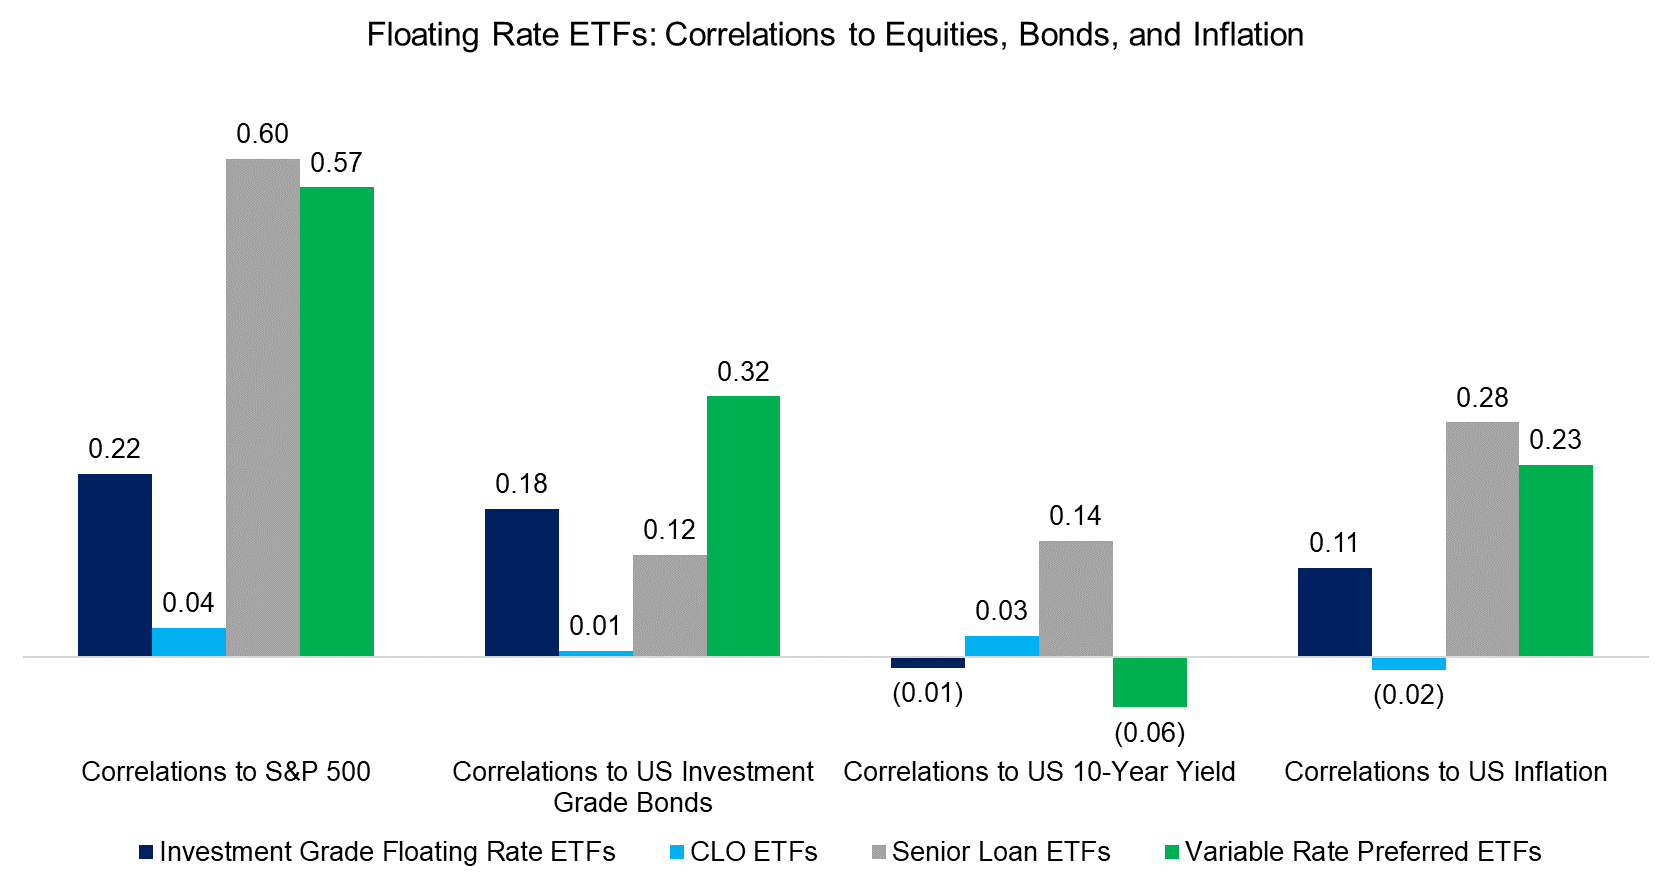 Floating Rate ETFs Correlations to Equities, Bonds, and Inflation